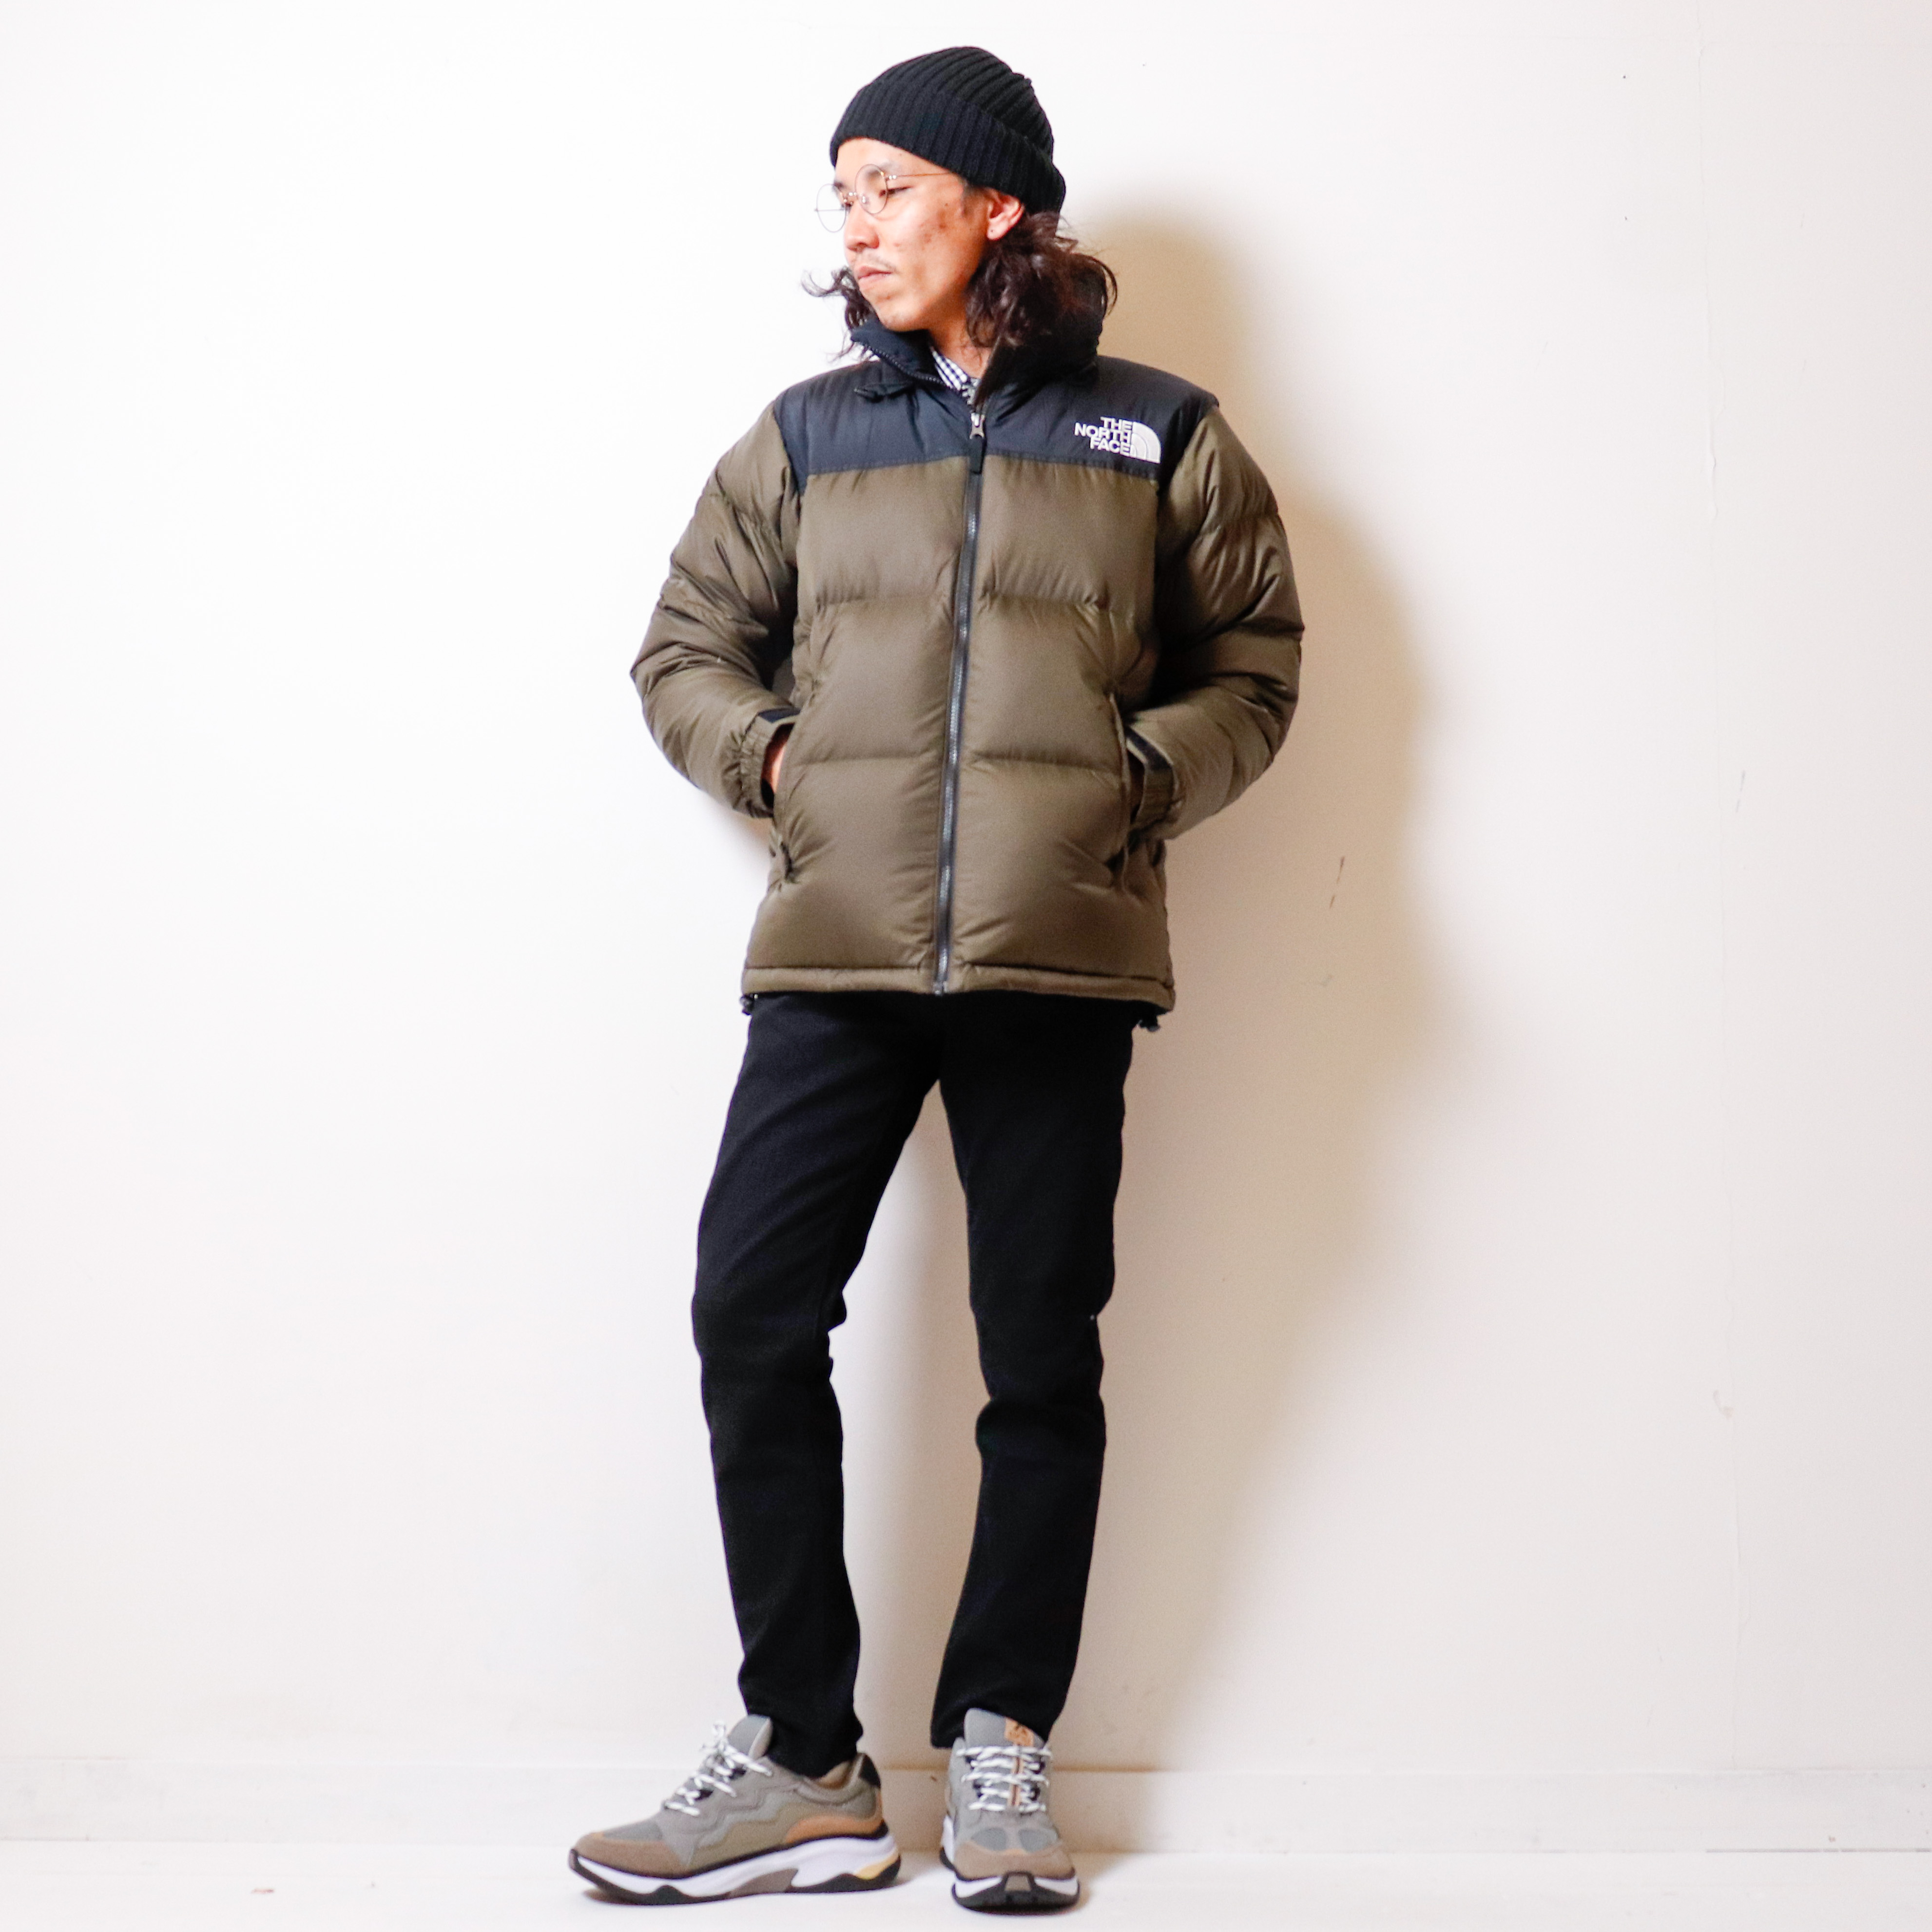 Men's】今も昔も。～THE NORTH FACE New Arrival～ | BLUEBEAT ONLINE